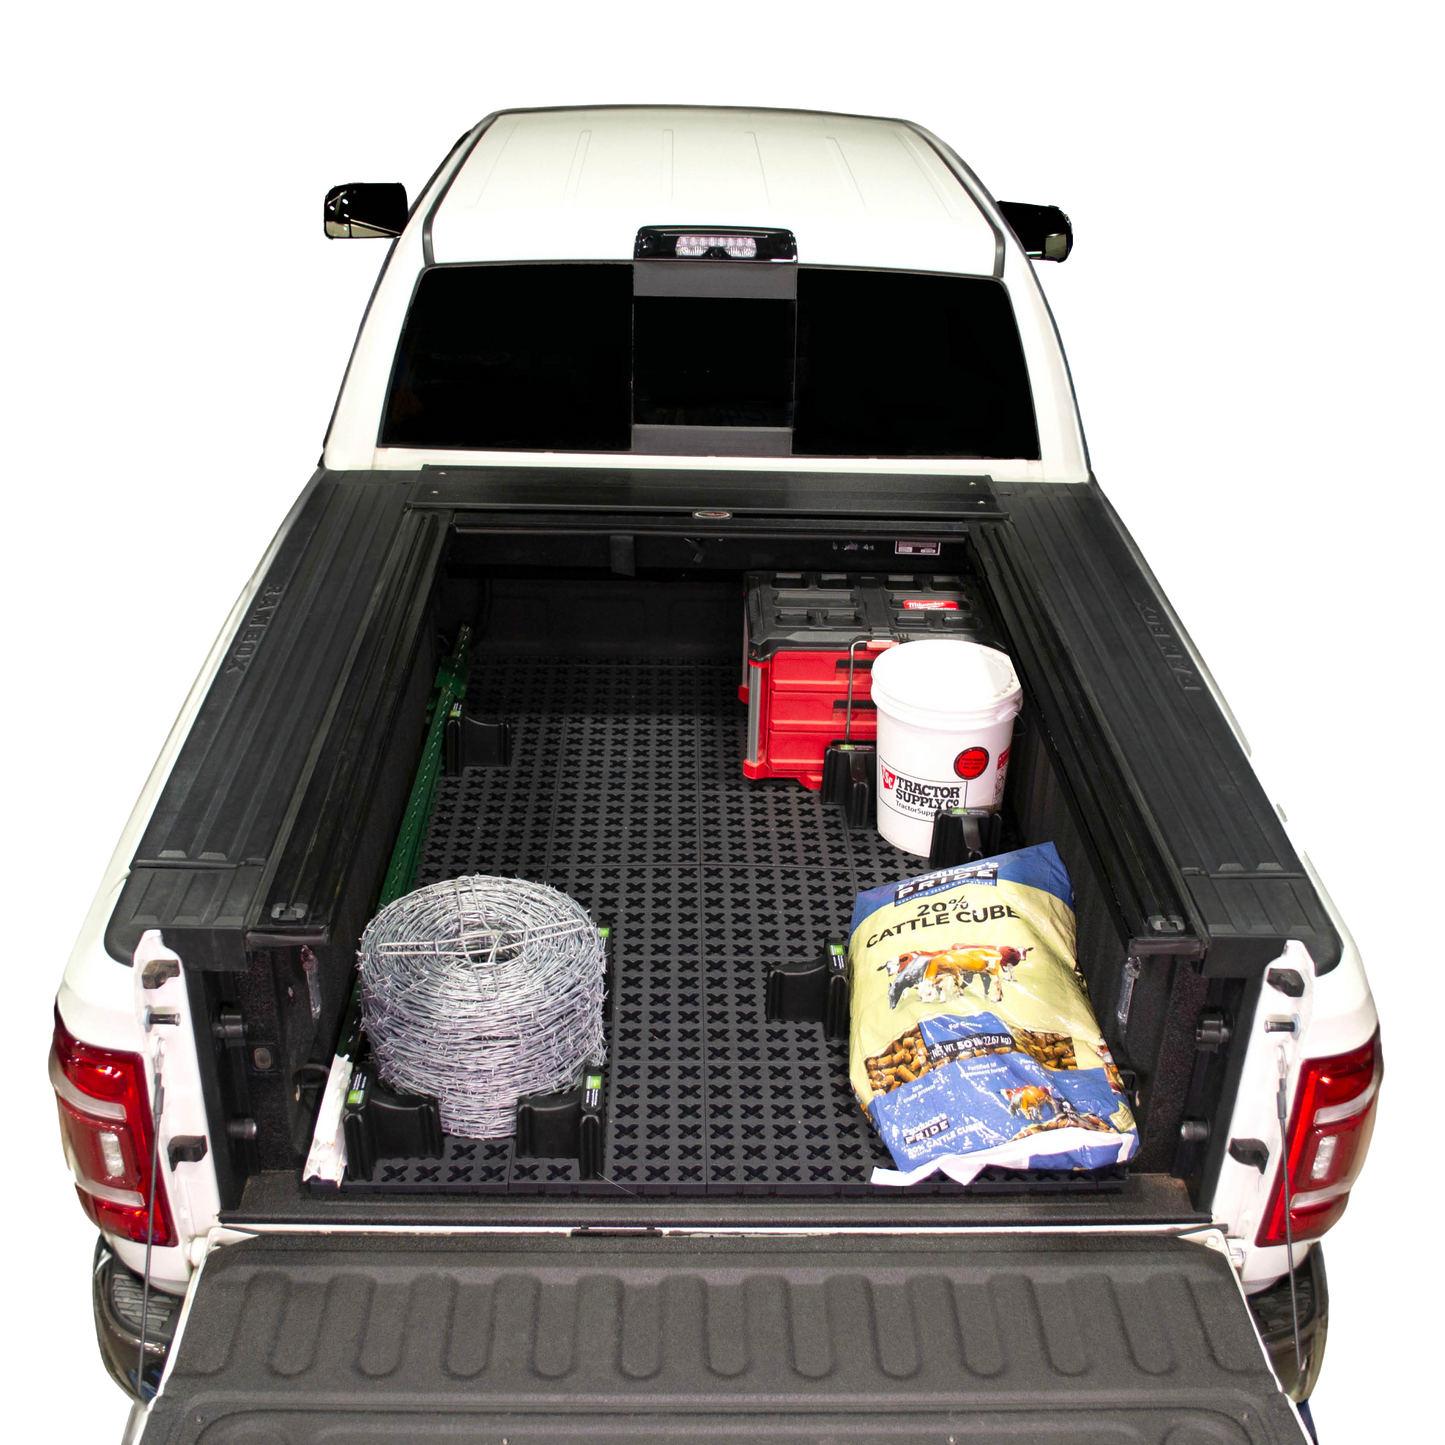 Tmat Truck Bed Mat & Cargo Management System (Long Bed 8' to 8'2")